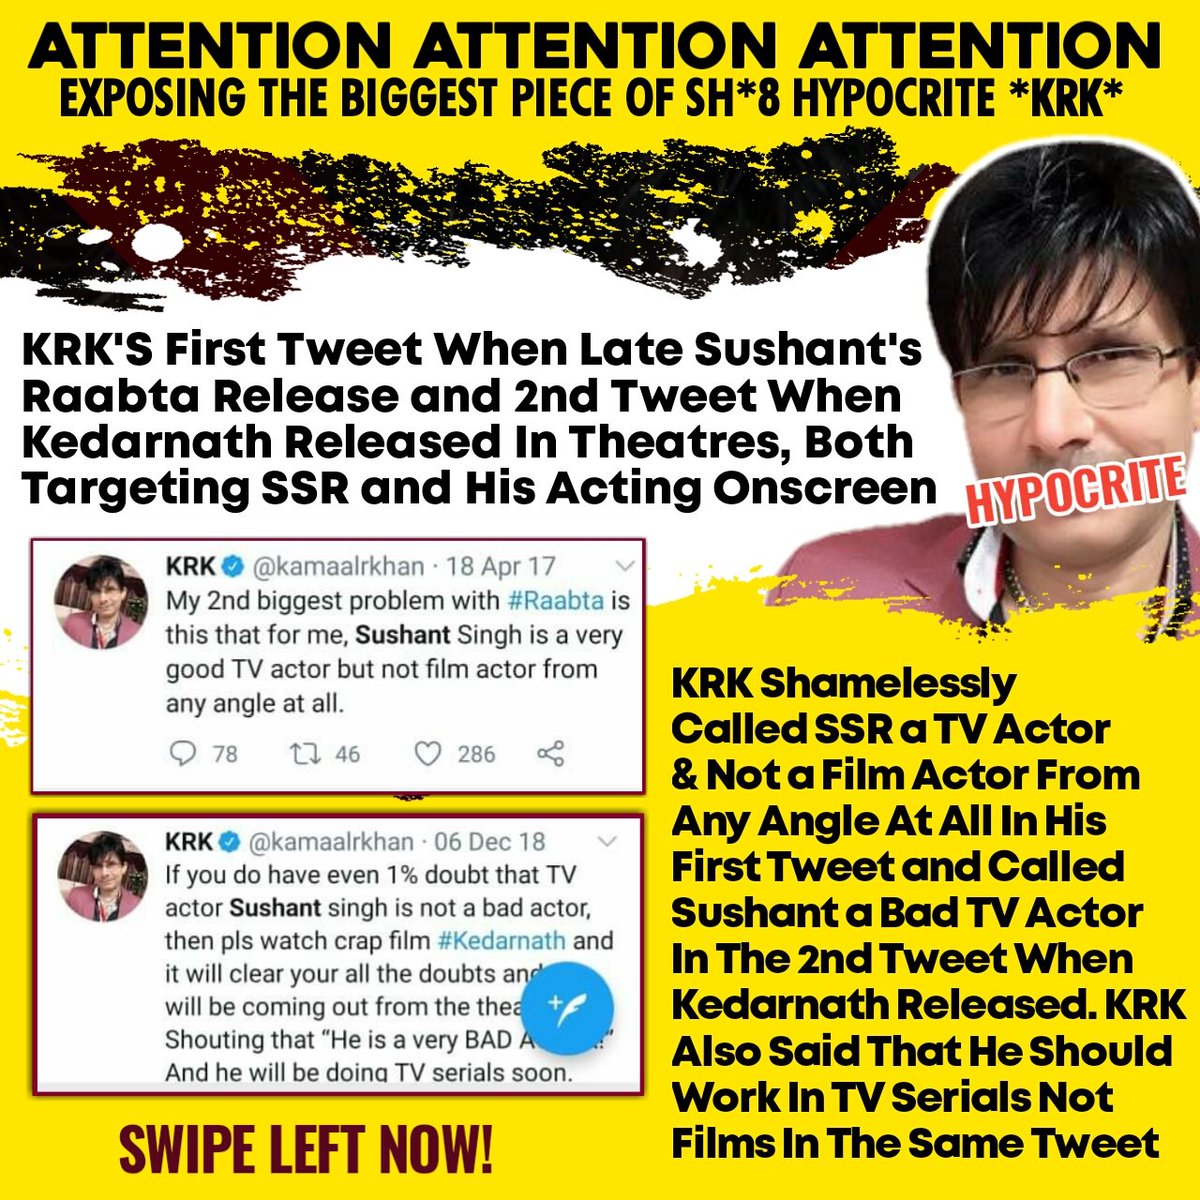 EXPOSING KRK - 4First Tweet In The Pic Is From Raabta Film Release Time Where KRK Called Sushant Not a Bollywood Actor From Any Angle!2nd Tweet From Kedarnath Time Where  @kamaalrkhan Said Sushant Should Not Work In Films, He Is a TV Actor! #FakeKRKRealCulpritOfSushant